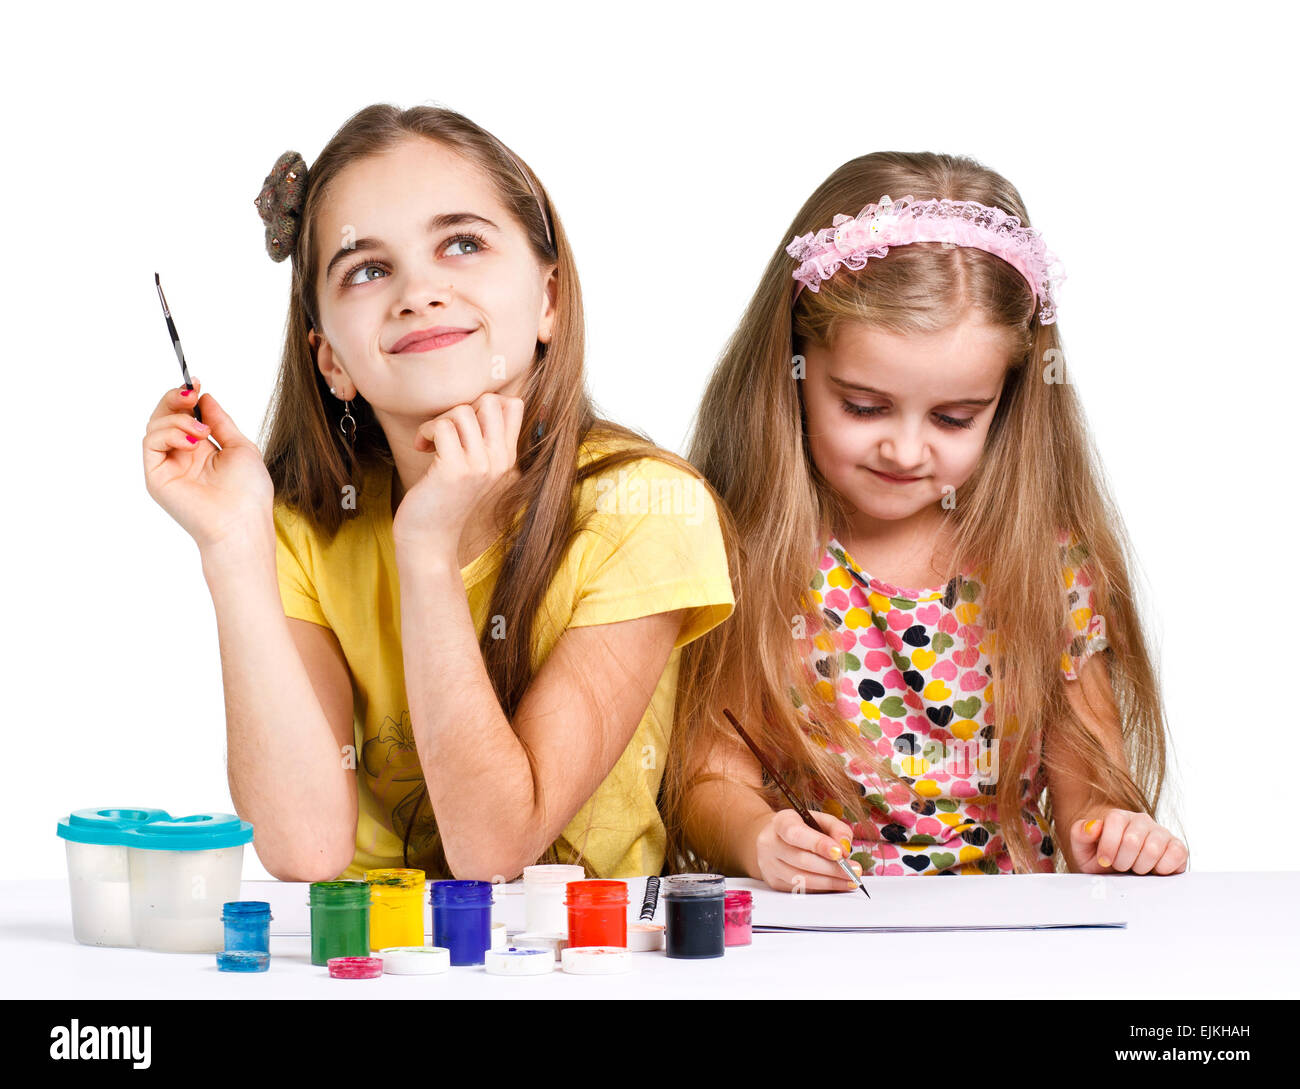 girls painting together Stock Photo